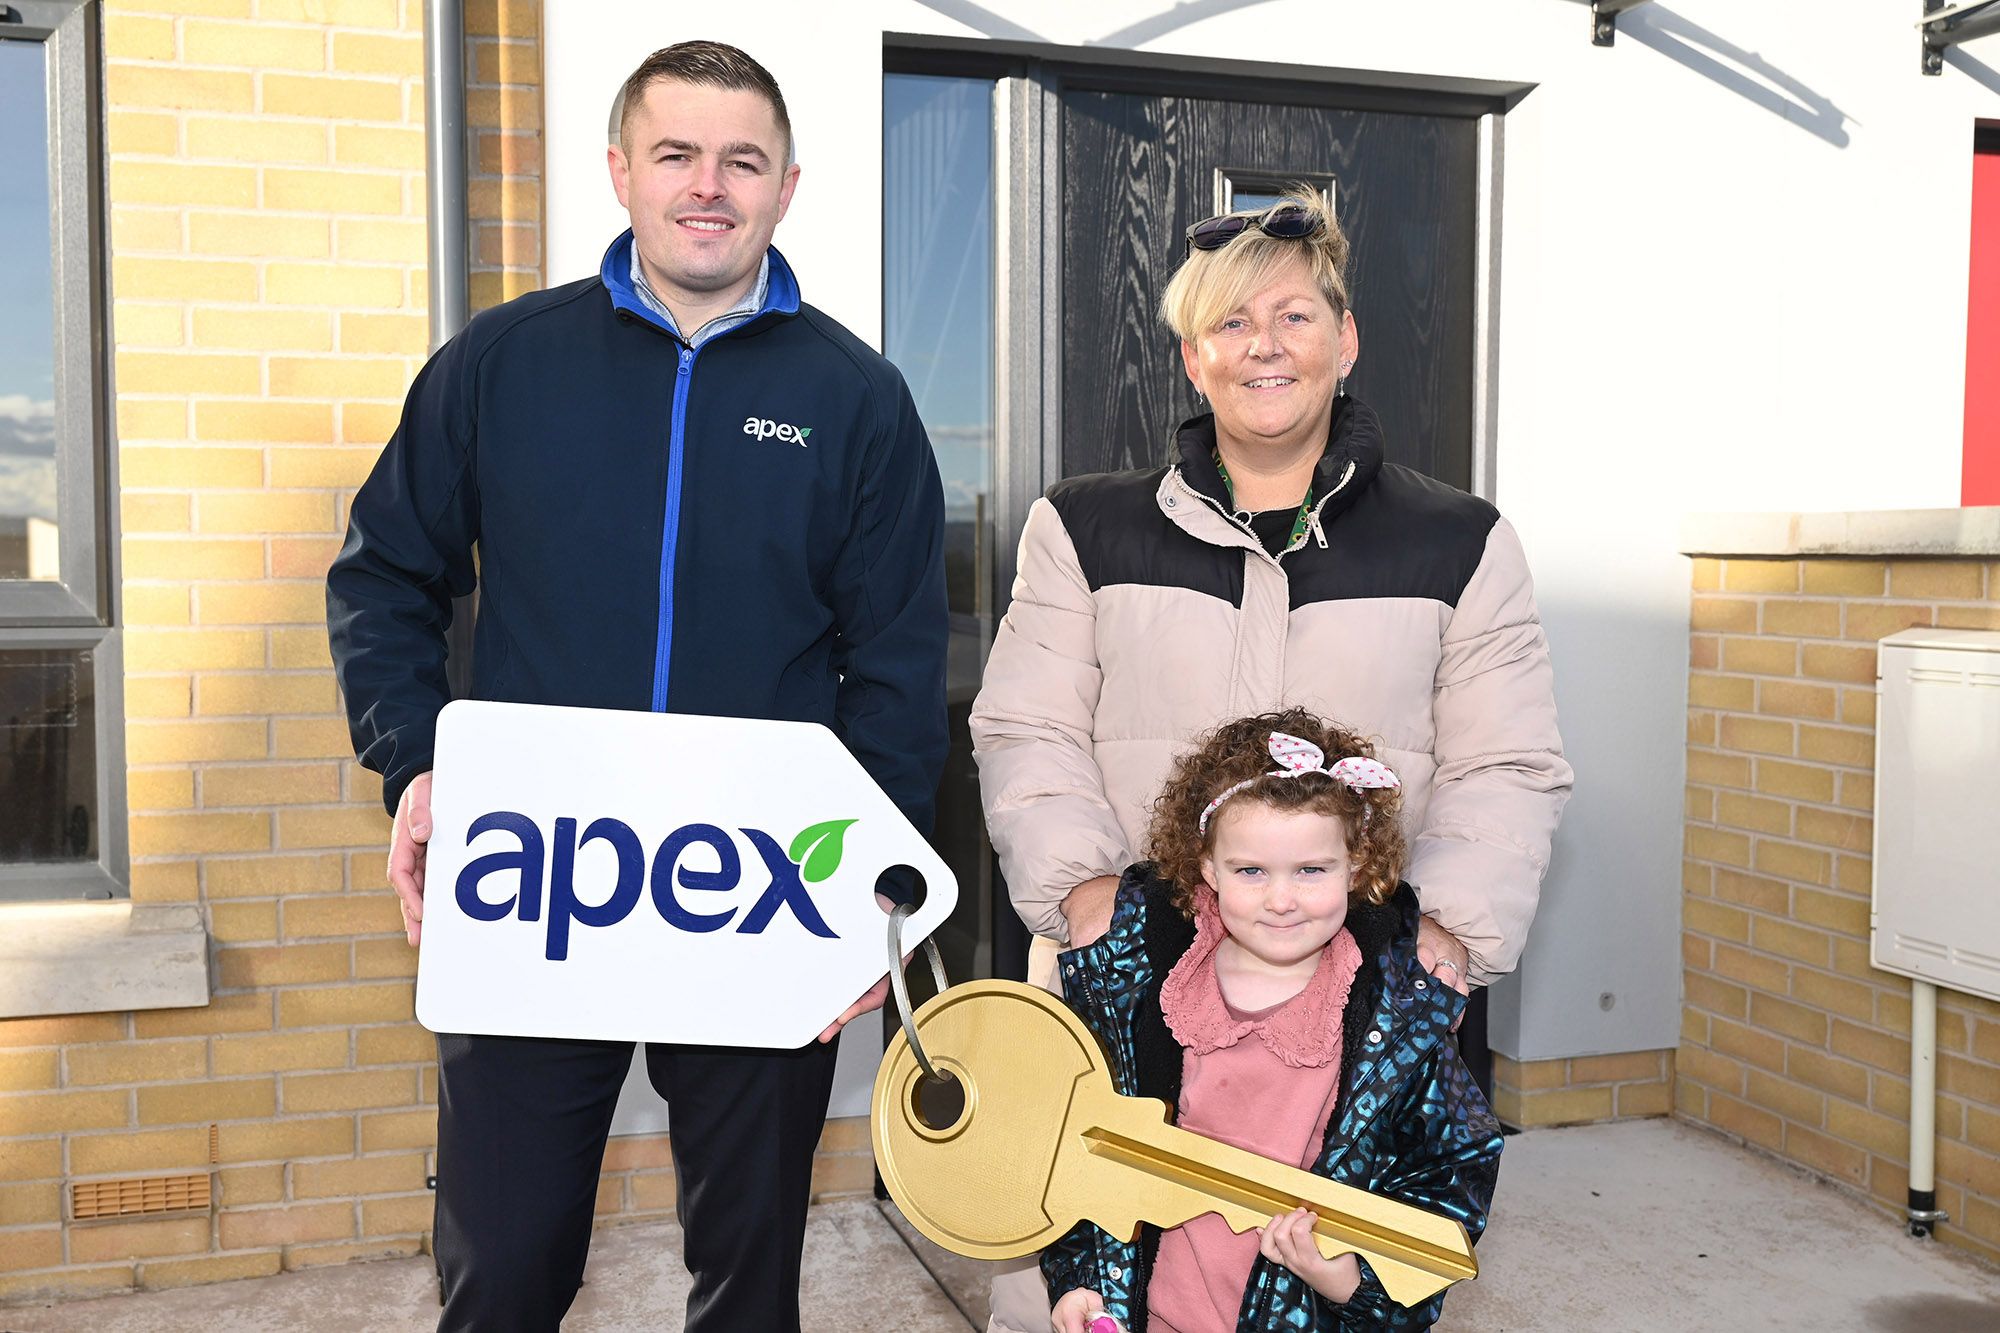 NEW HOME: Nicola Marshall and her daughter Fiadh getting the keys to their new home in Black Ridge View. They are joined by Harry Dyer from Apex Housing Association